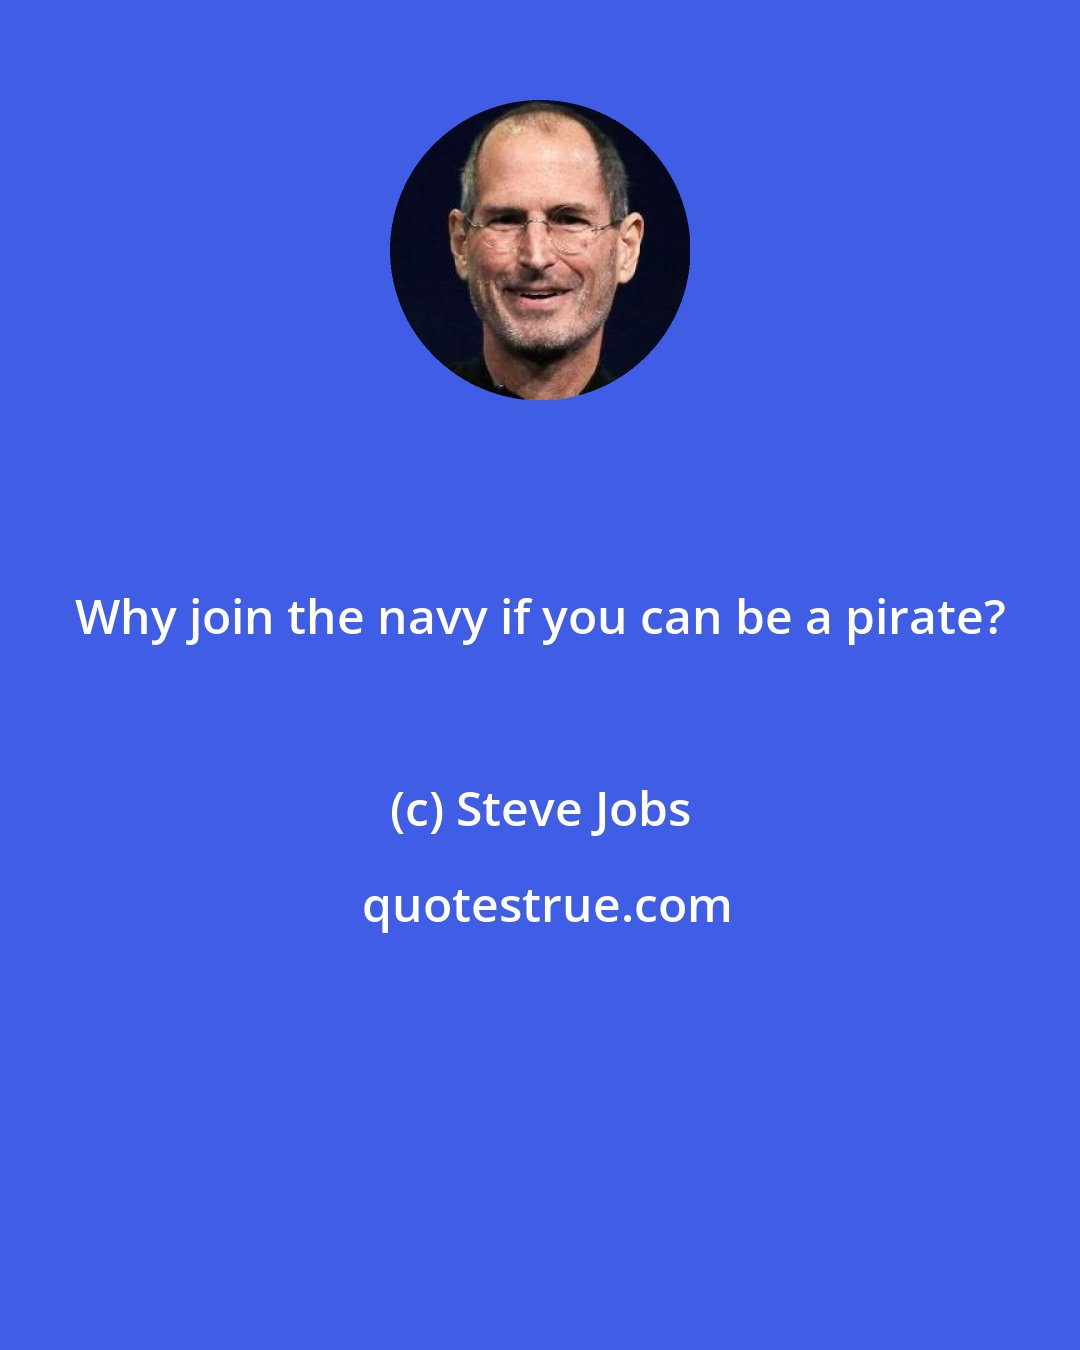 Steve Jobs: Why join the navy if you can be a pirate?